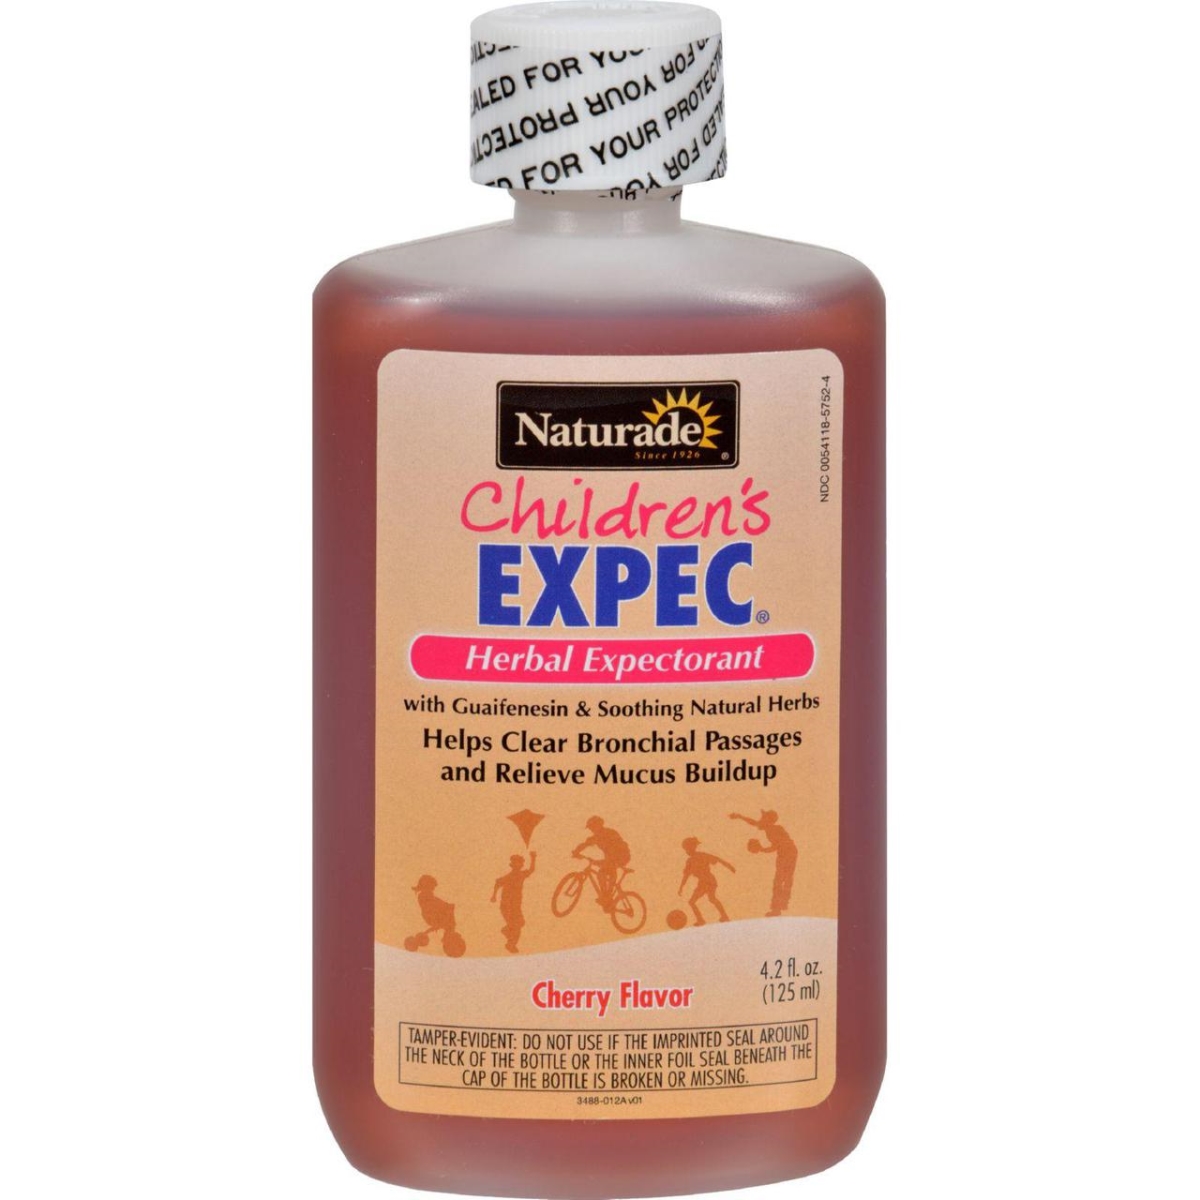 Hg0275263 4.2 Oz Expectorant Childrens Cough Syrup